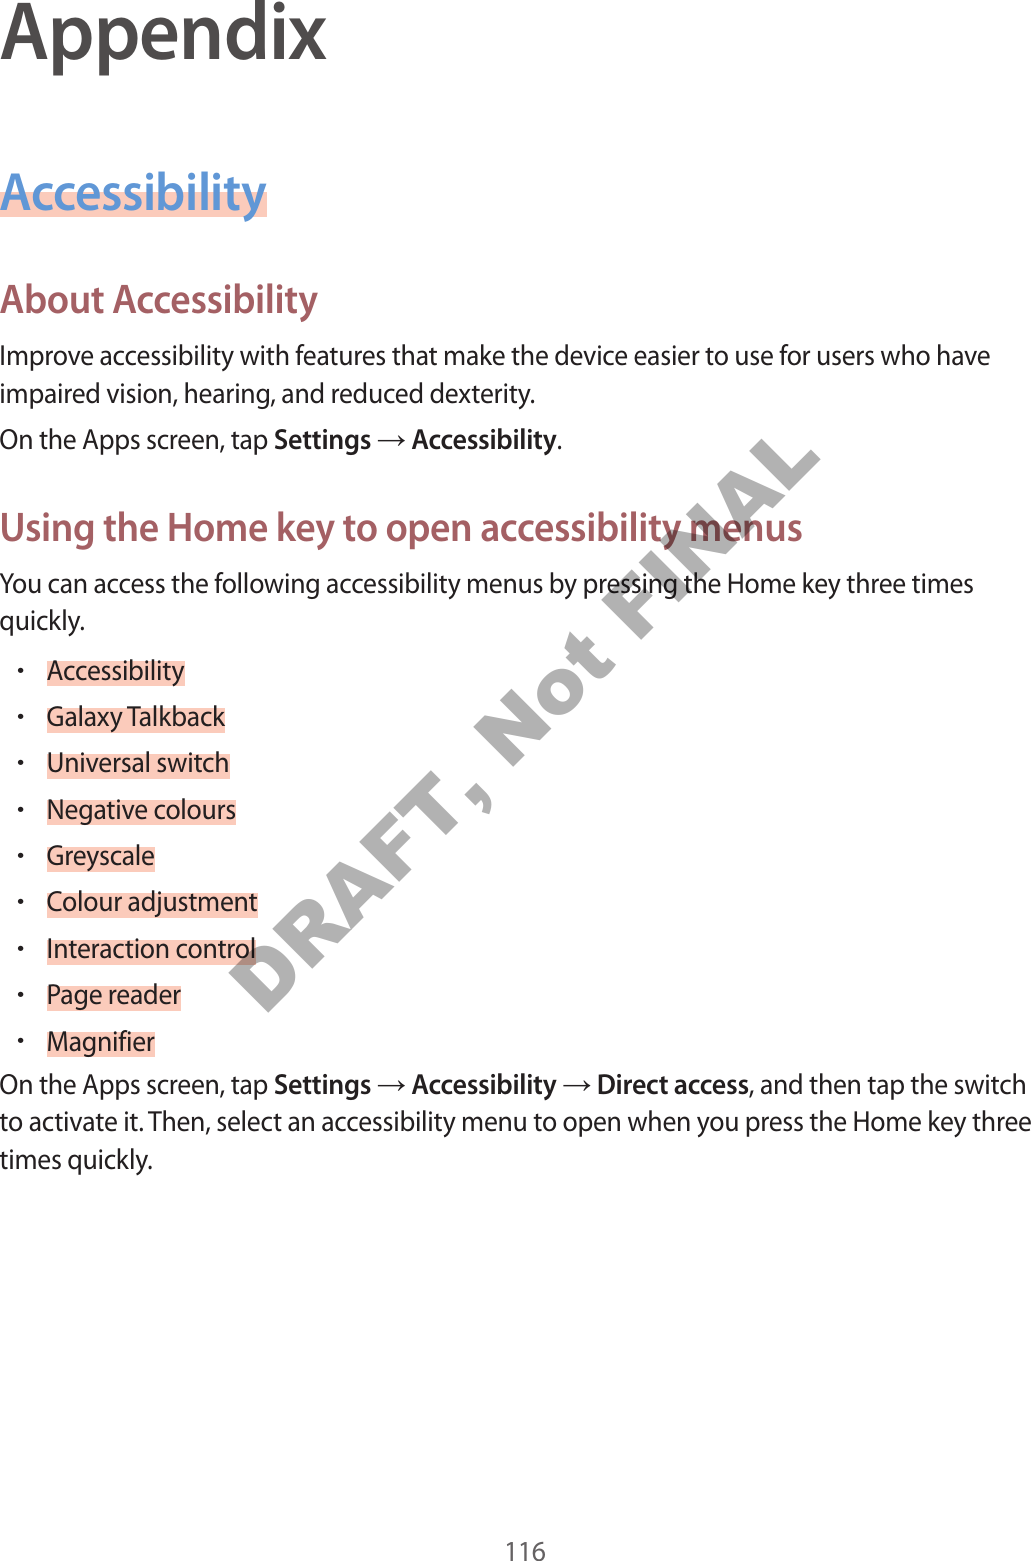 116AppendixAccessibilityAbout A c c essibilityImprove ac c essibility with featur es tha t make the device easier t o use f or users who ha v e impaired vision, hearing , and r educed de xterity.On the Apps screen, tap Settings  Accessibility.Using the Home k ey t o open ac c essibility menusYou can access the follo wing acc essibility menus by pr essing the Home key thr ee times quickly.•Accessibility•Galaxy T alkback•Universal switch•Negative c olours•Greyscale•Colour adjustment•Interaction control•P age r eader•MagnifierOn the Apps screen, tap Settings  Accessibility  Direct access, and then tap the switch to activate it. T hen, select an accessibility menu to open when you pr ess the Home key thr ee times quickly .DRAFT, Not FINAL